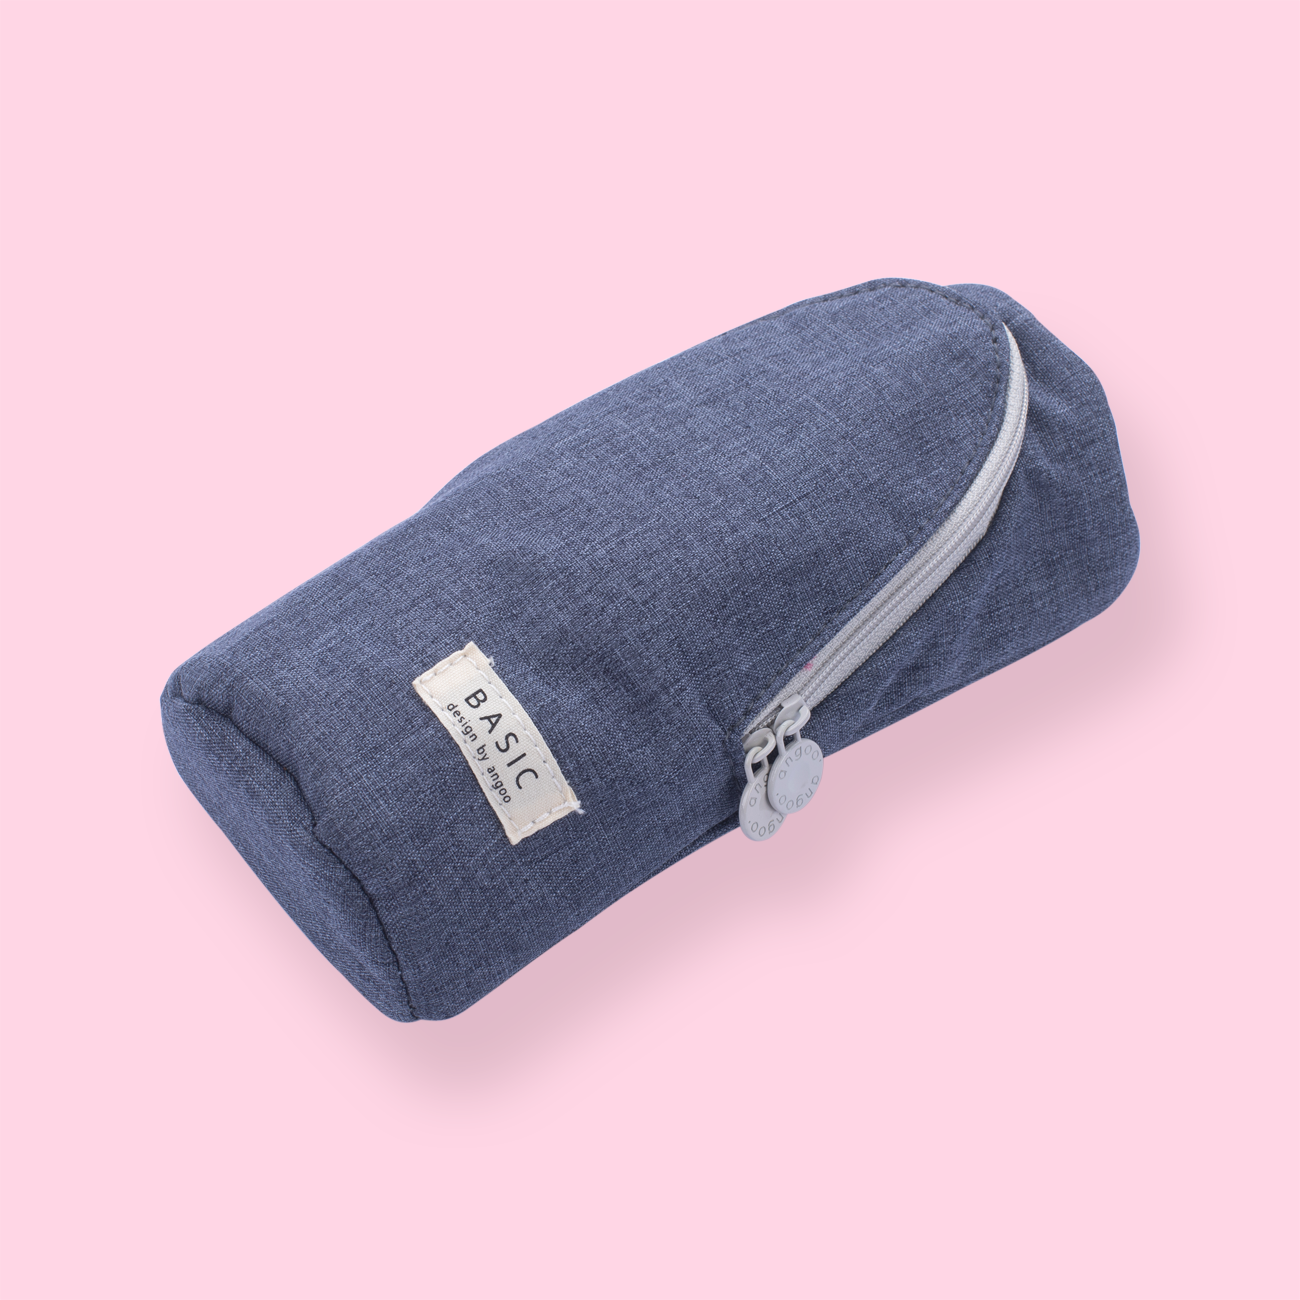 Stand Up Pencil Case - Dark Blue + Gray Side